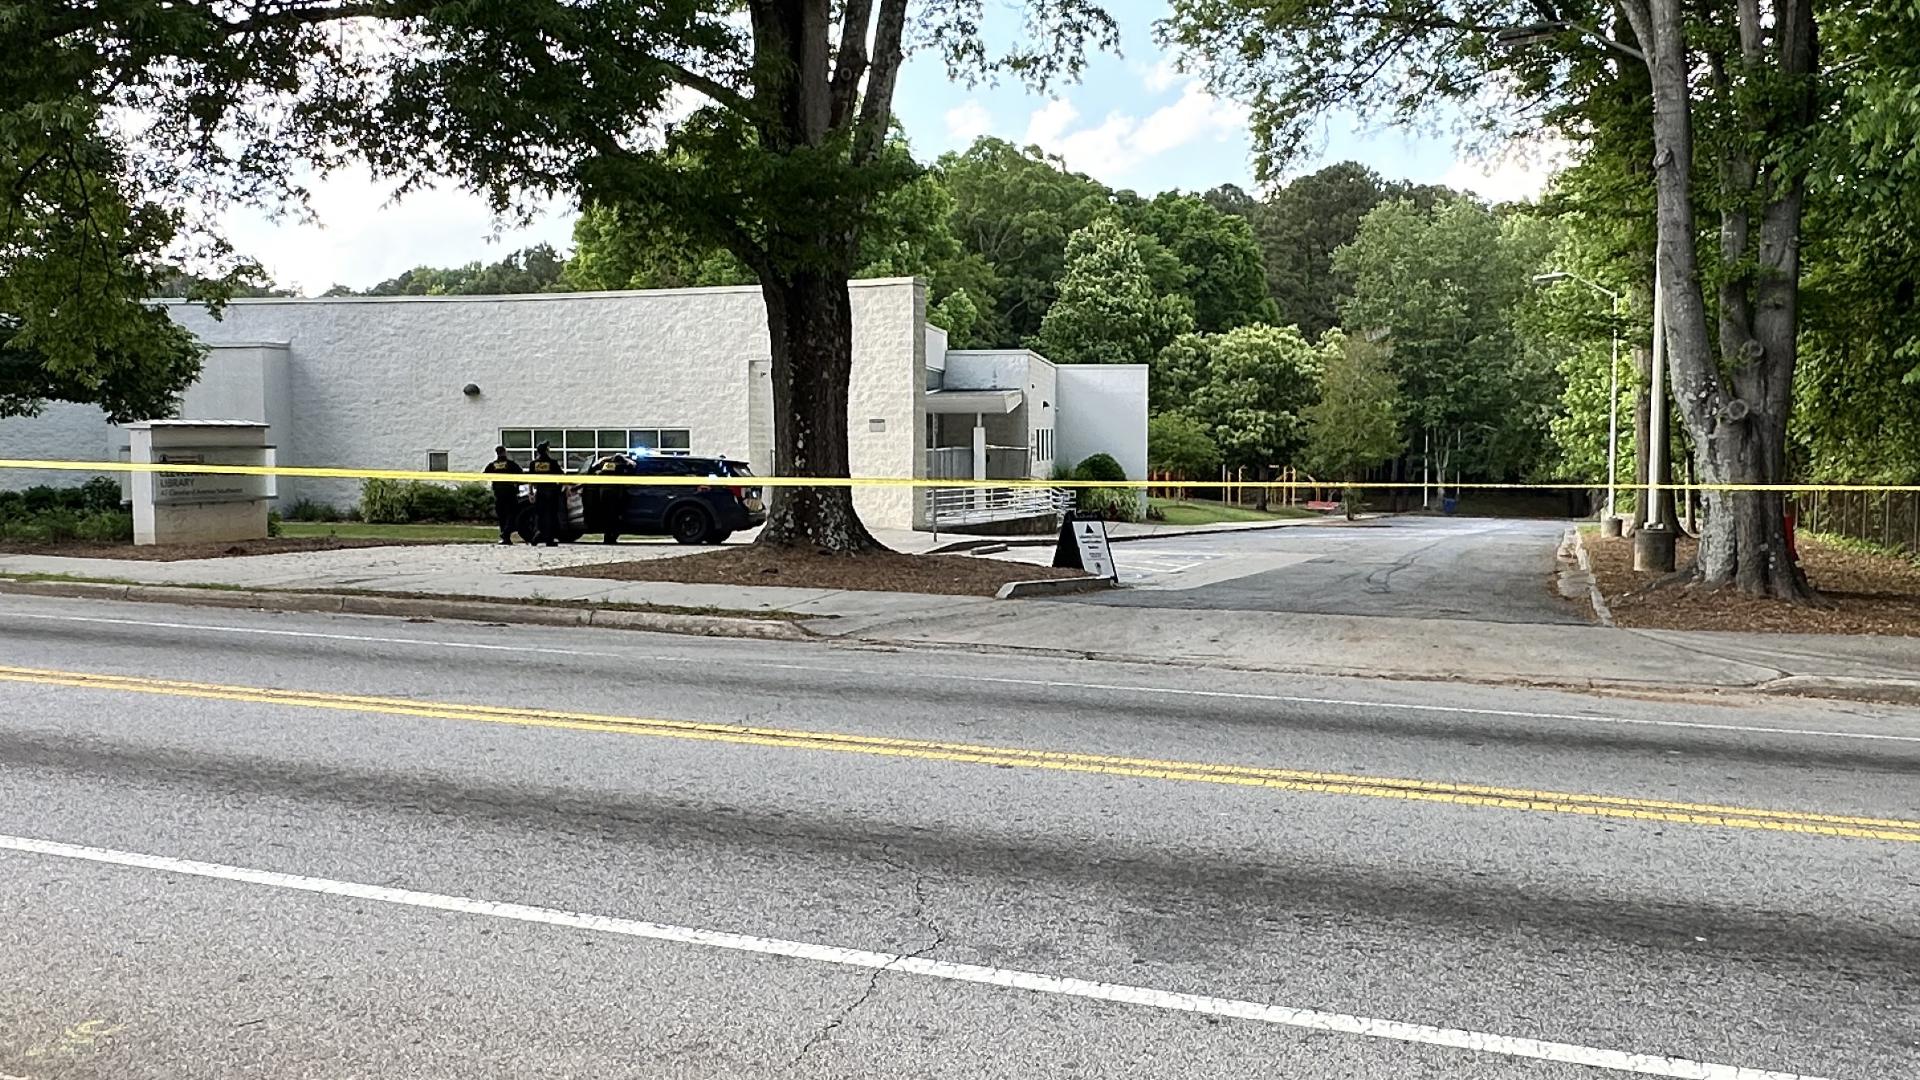 A man is dead after being shot in Brown Mills Park neighborhood in Atlanta on Monday afternoon.